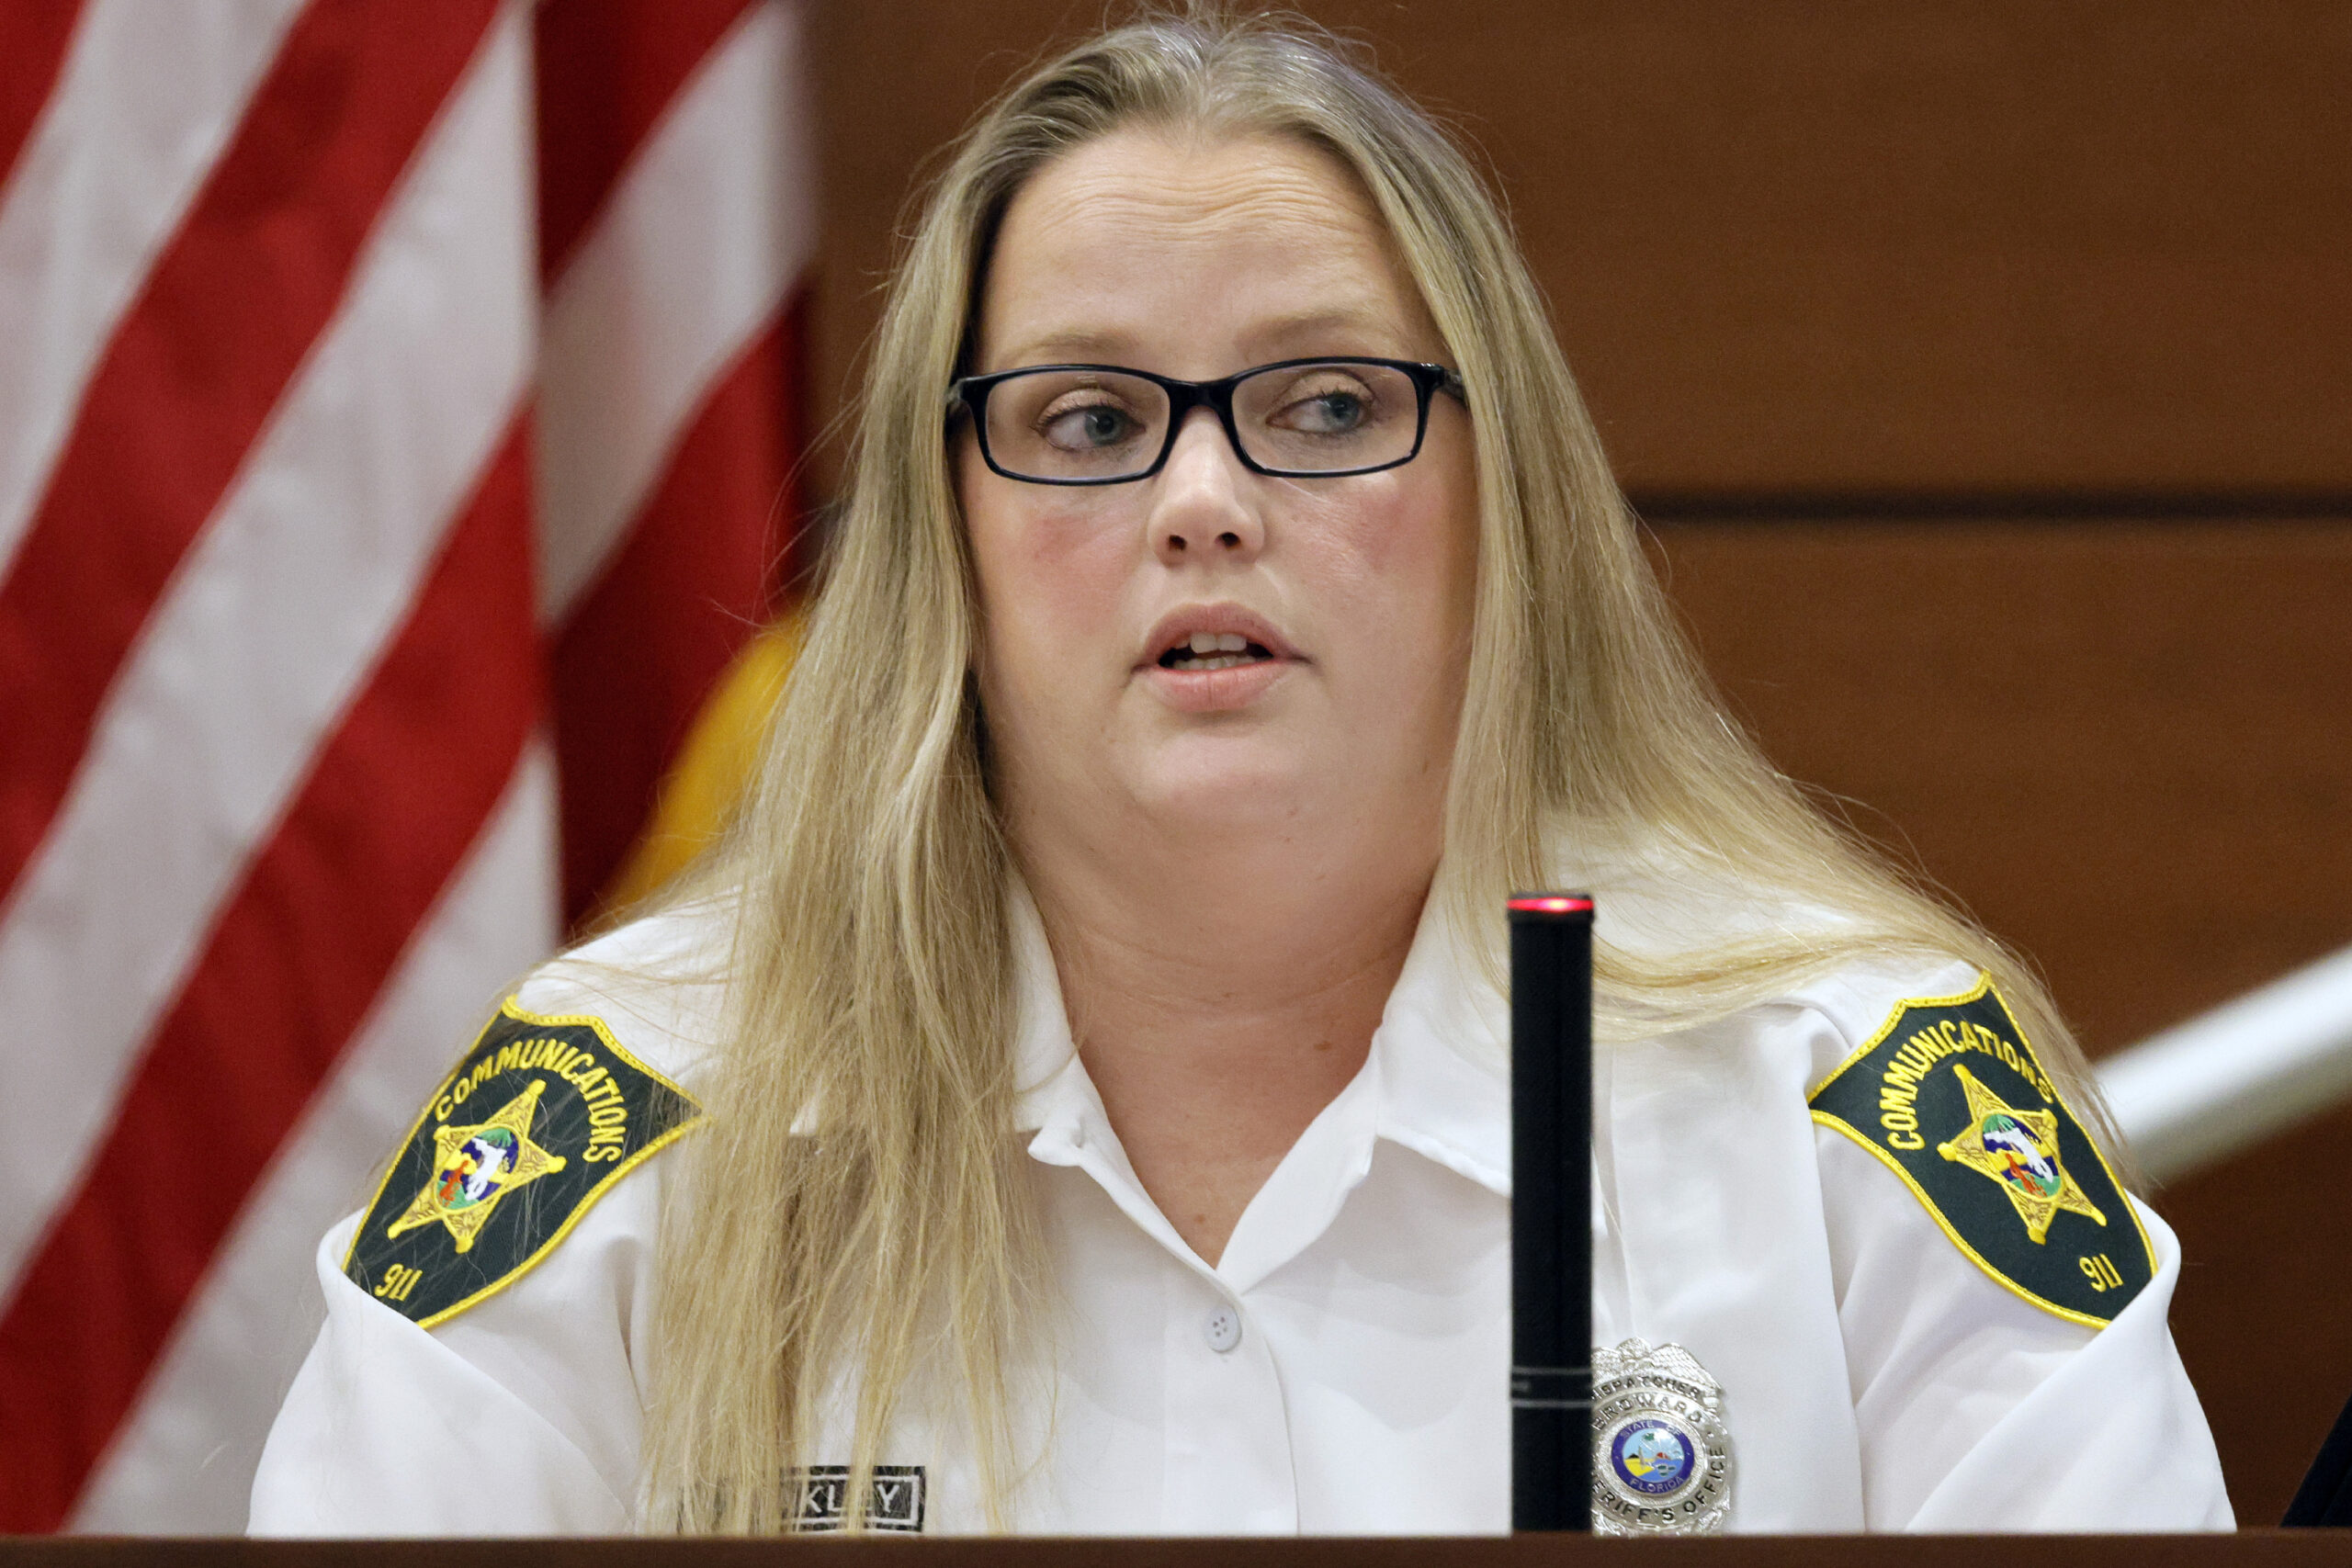 Broward Sheriff's Office communications operator Samantha Oakley testifies during the trial of form...